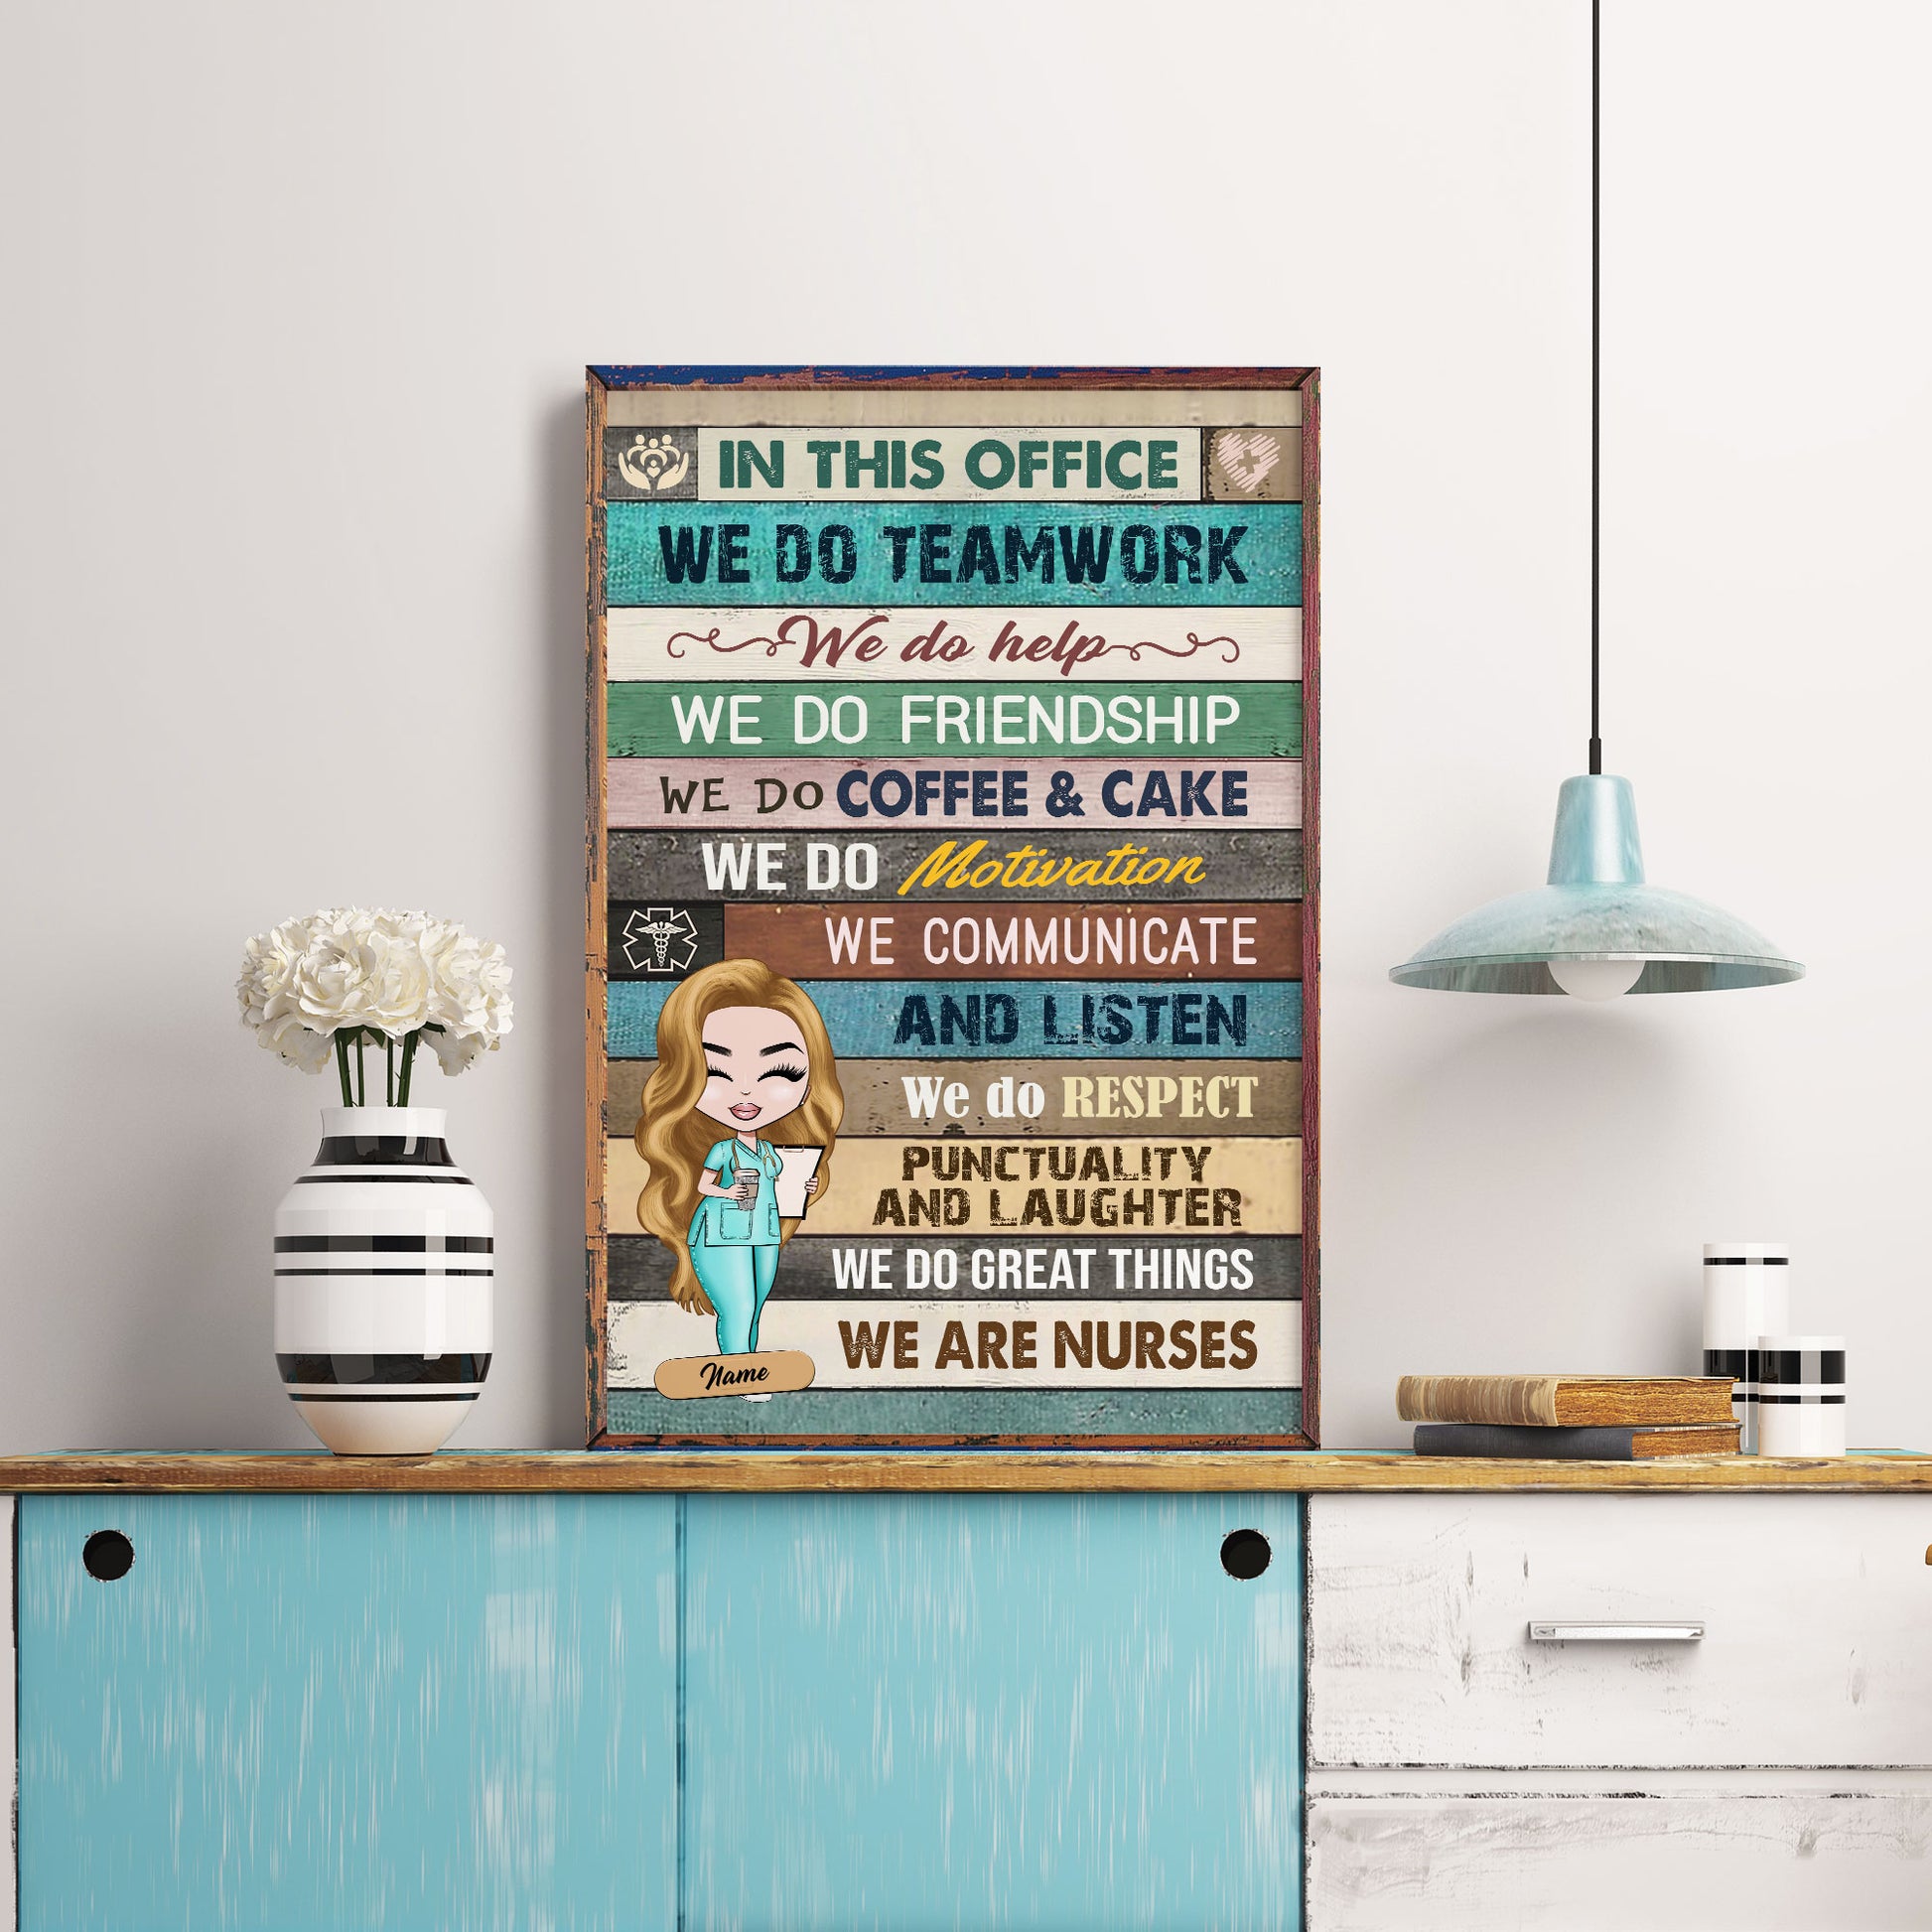 In This Office - Personalized Poster/Canvas - Gift For Nurse - Cartoon Nurse